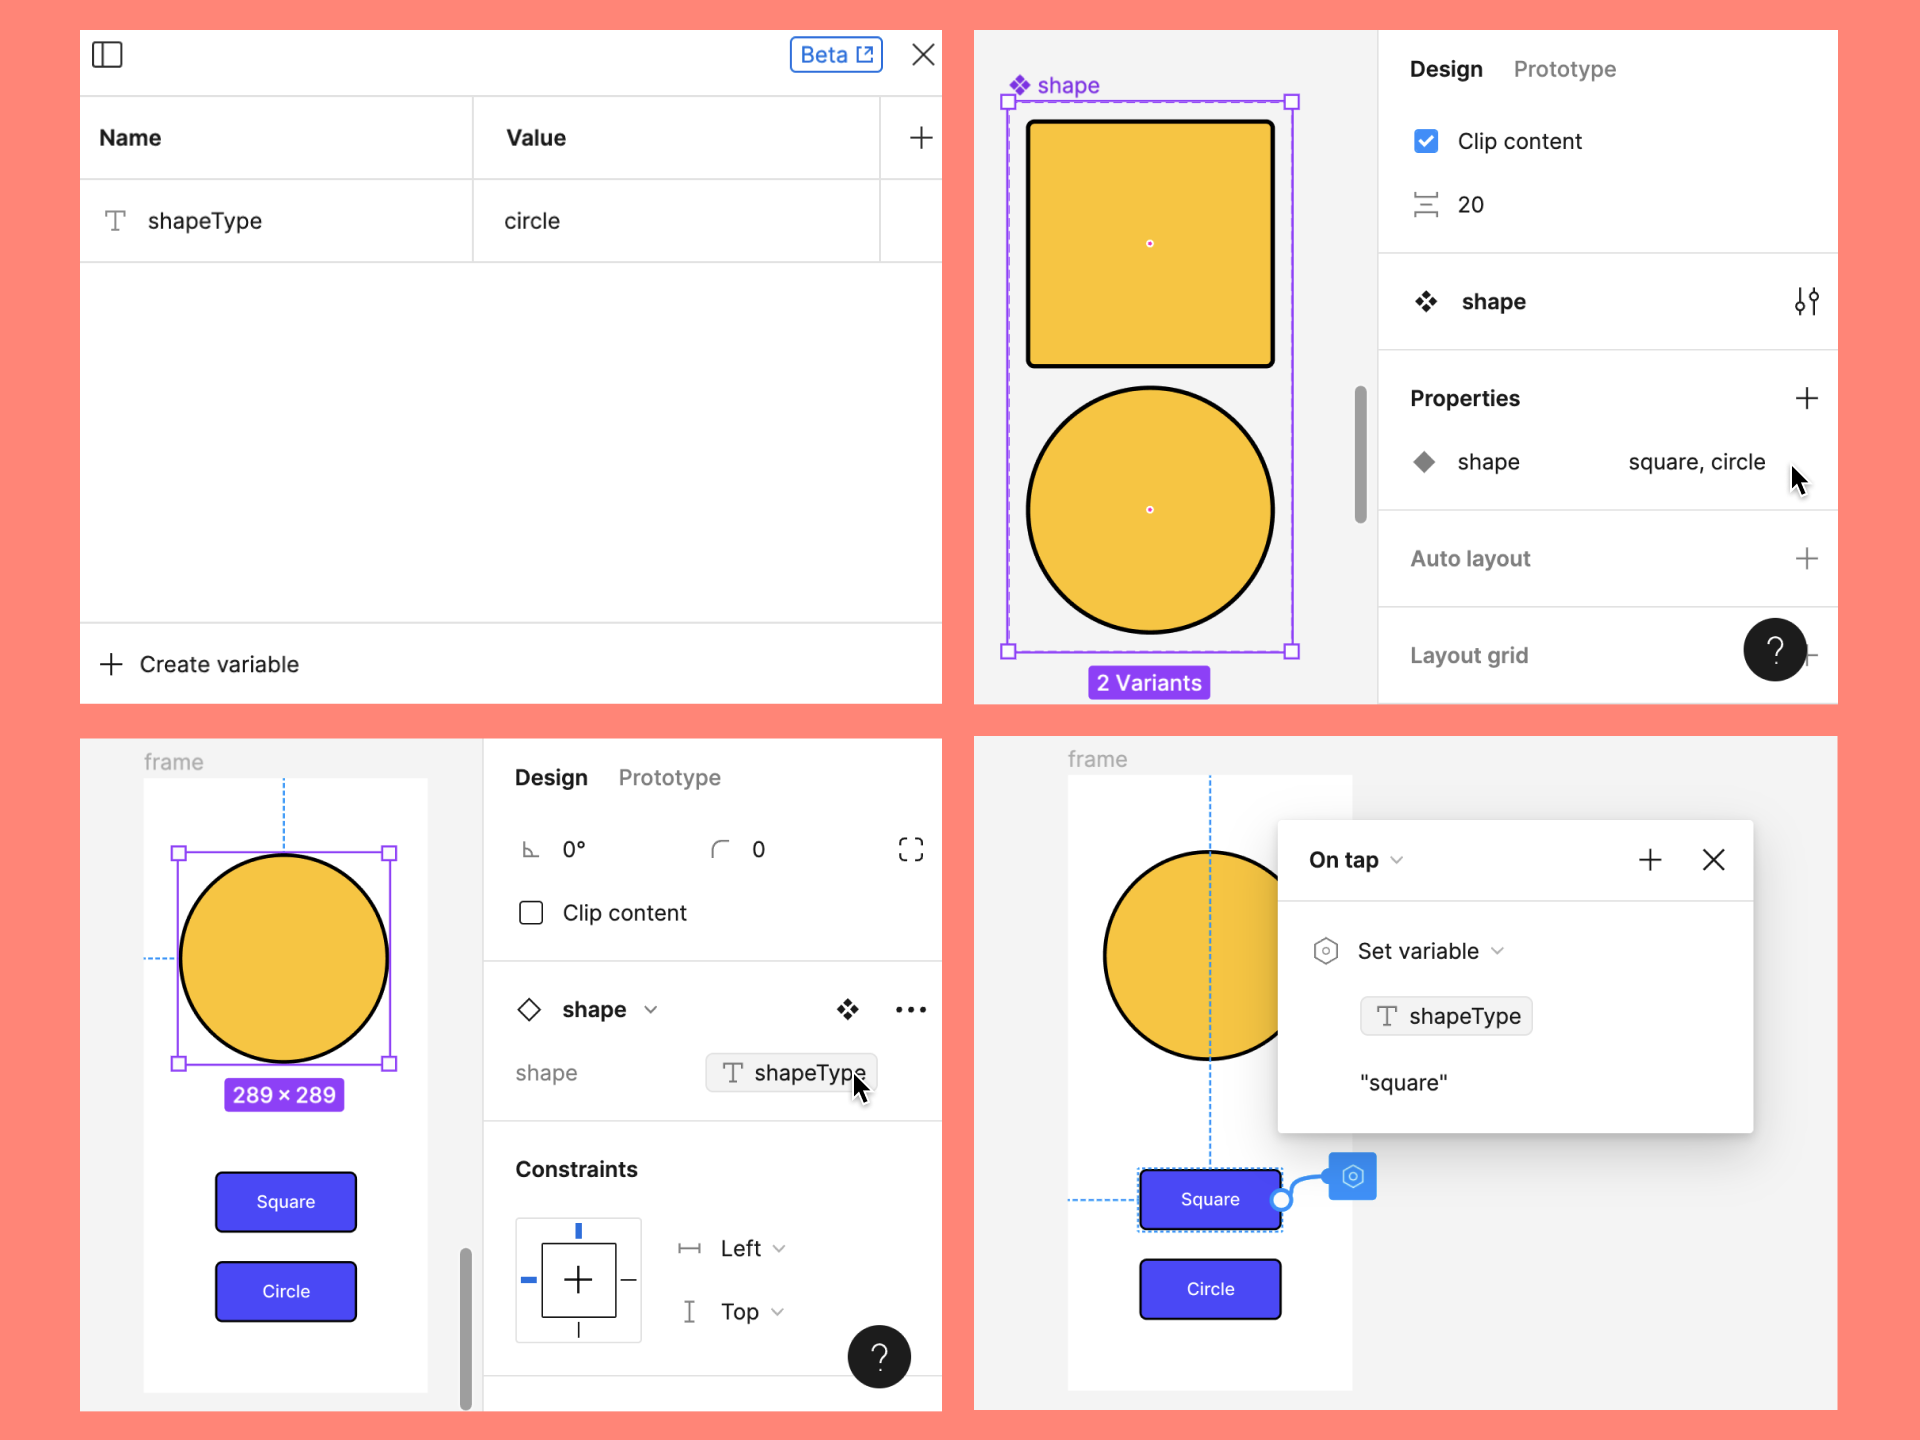 Screenshot 1: The variable authoring panel, with a string variable ShapeType created, with a default value of Circle. Screenshot 2: A component set, with a Shape property with two values: square, circle. Screenshot 3: An instance of the circle variant on a frame, with the ShapeType variable applied to the component property. Screenshot 4: A button beneath the instance on the frame, with an interaction: Set variable ShapeType to Square.